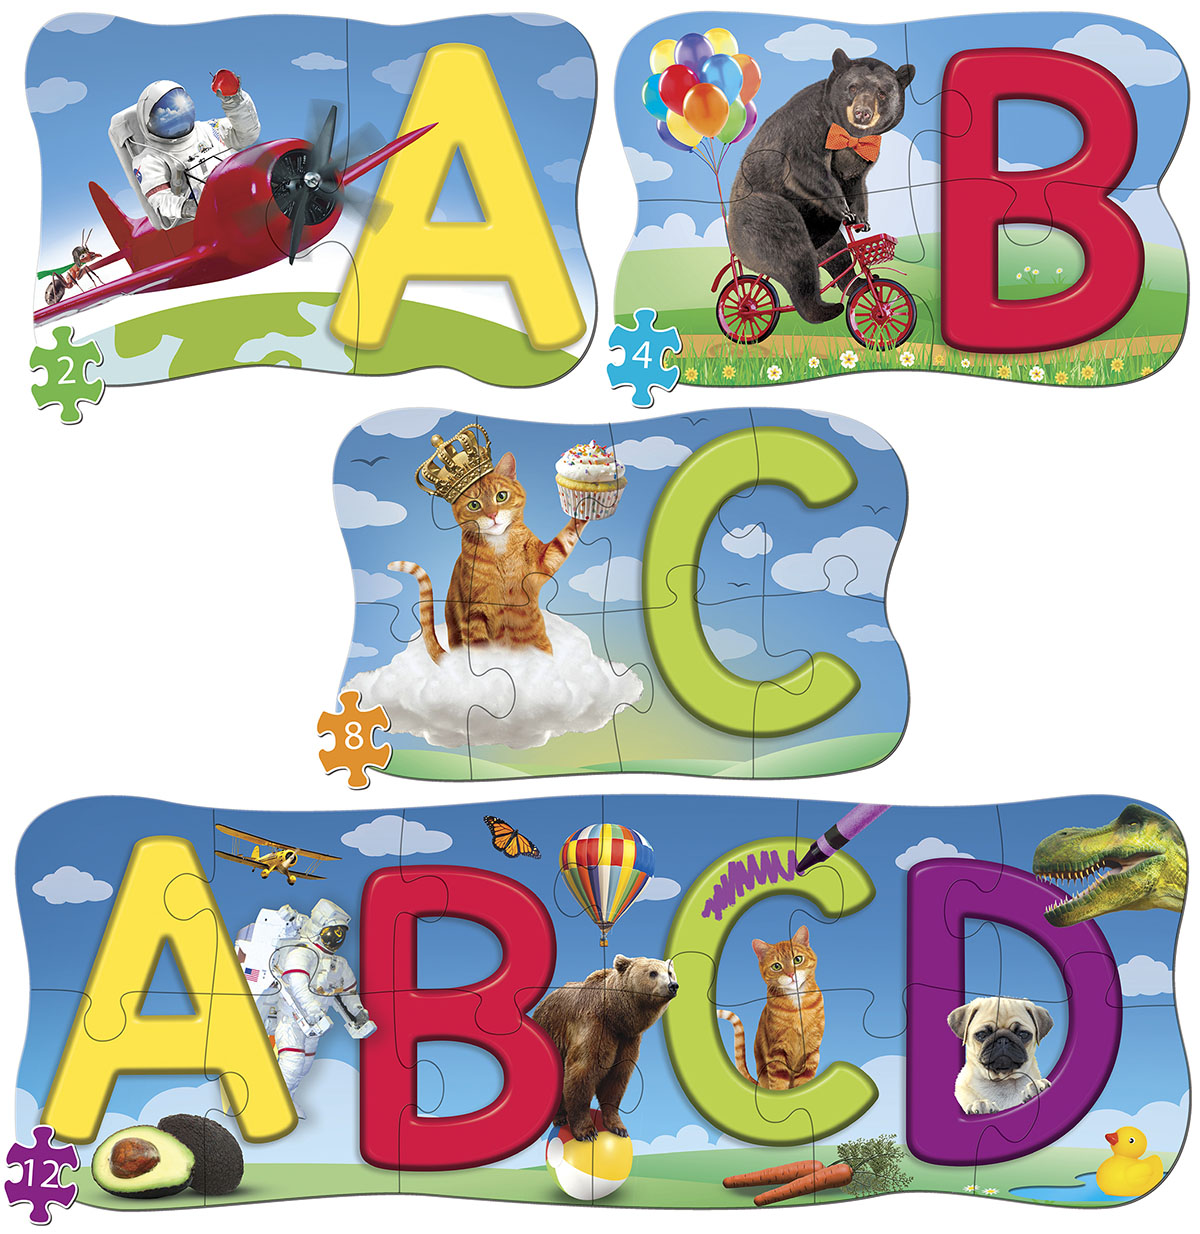 ABCs Multipack Educational Jigsaw Puzzle